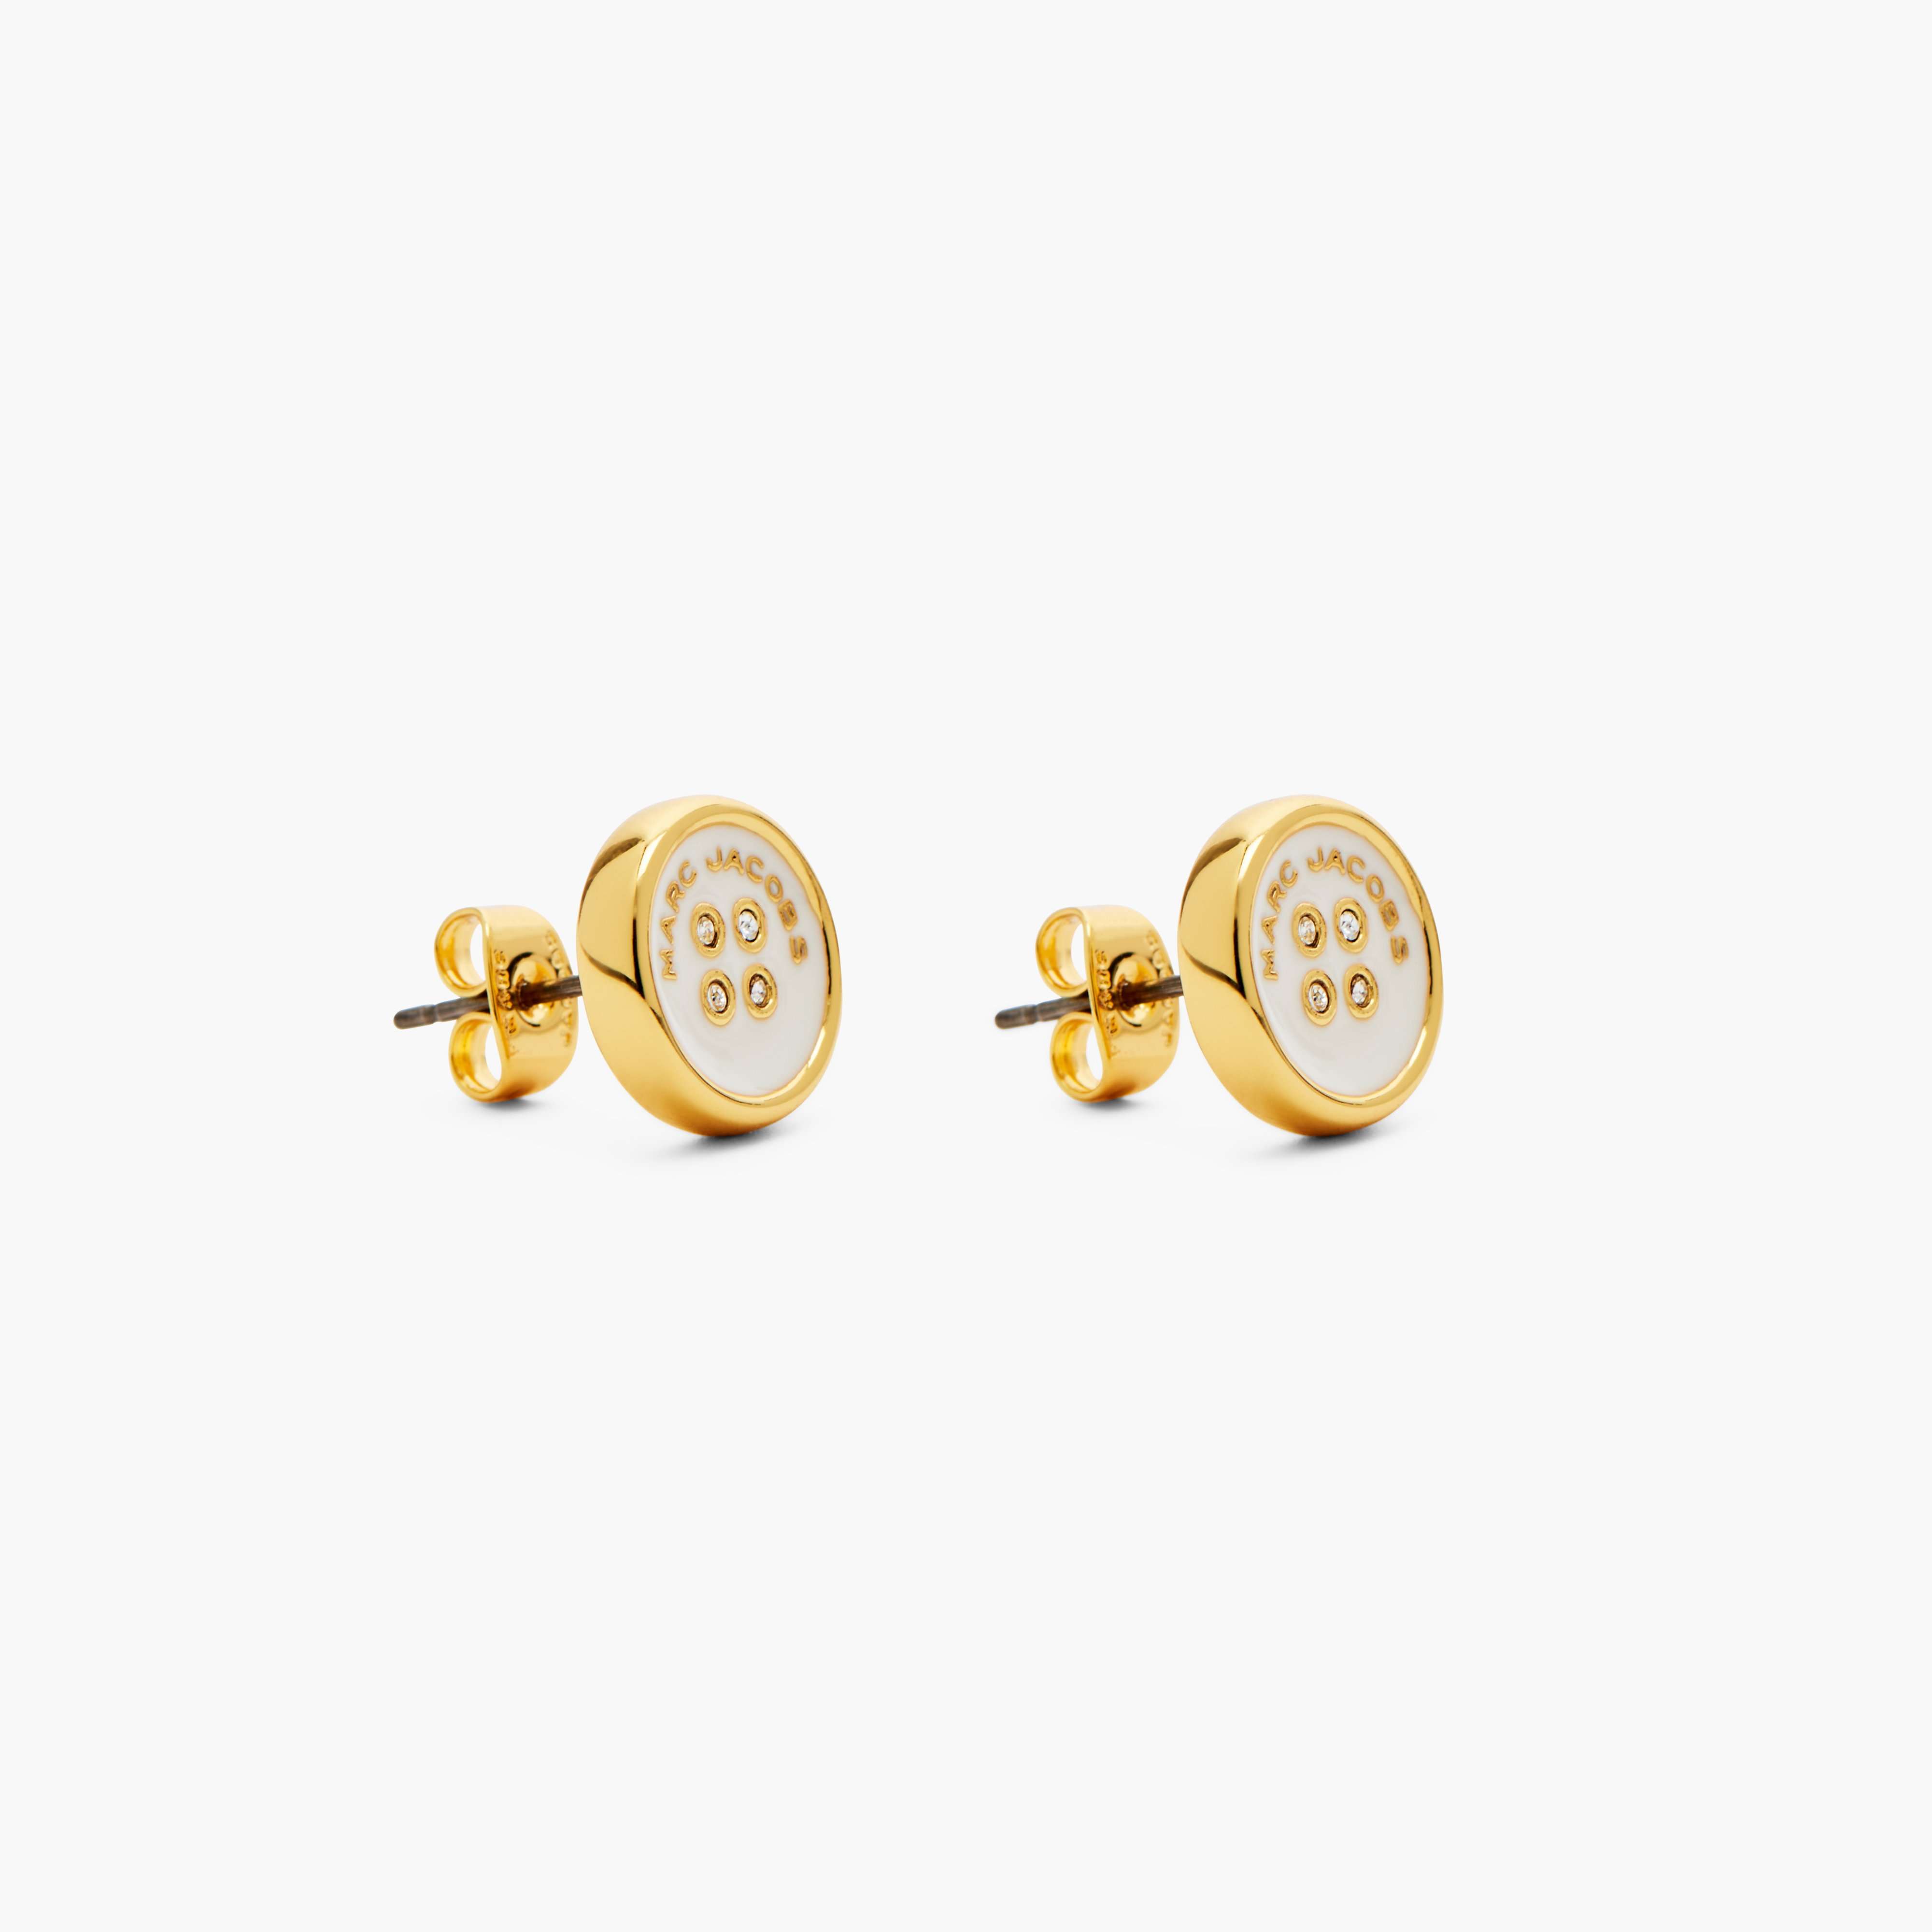 The Button Stud Earrings in Gold/Cream